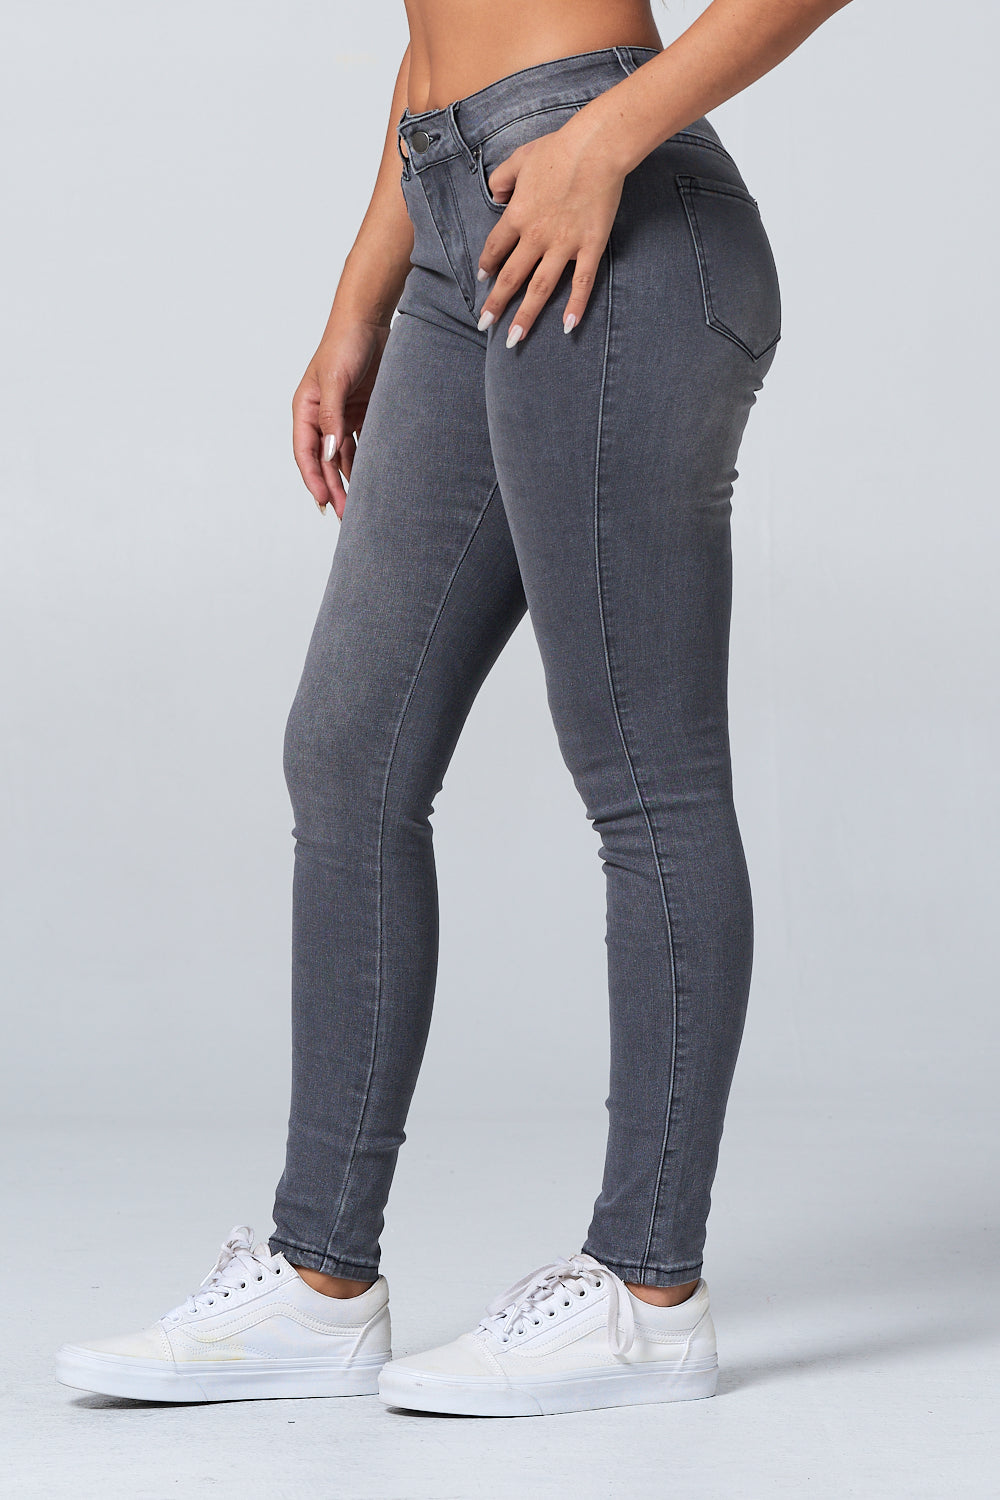 Classic Mid Rise Skinny Jean Extreme Stretch Gray WR3702